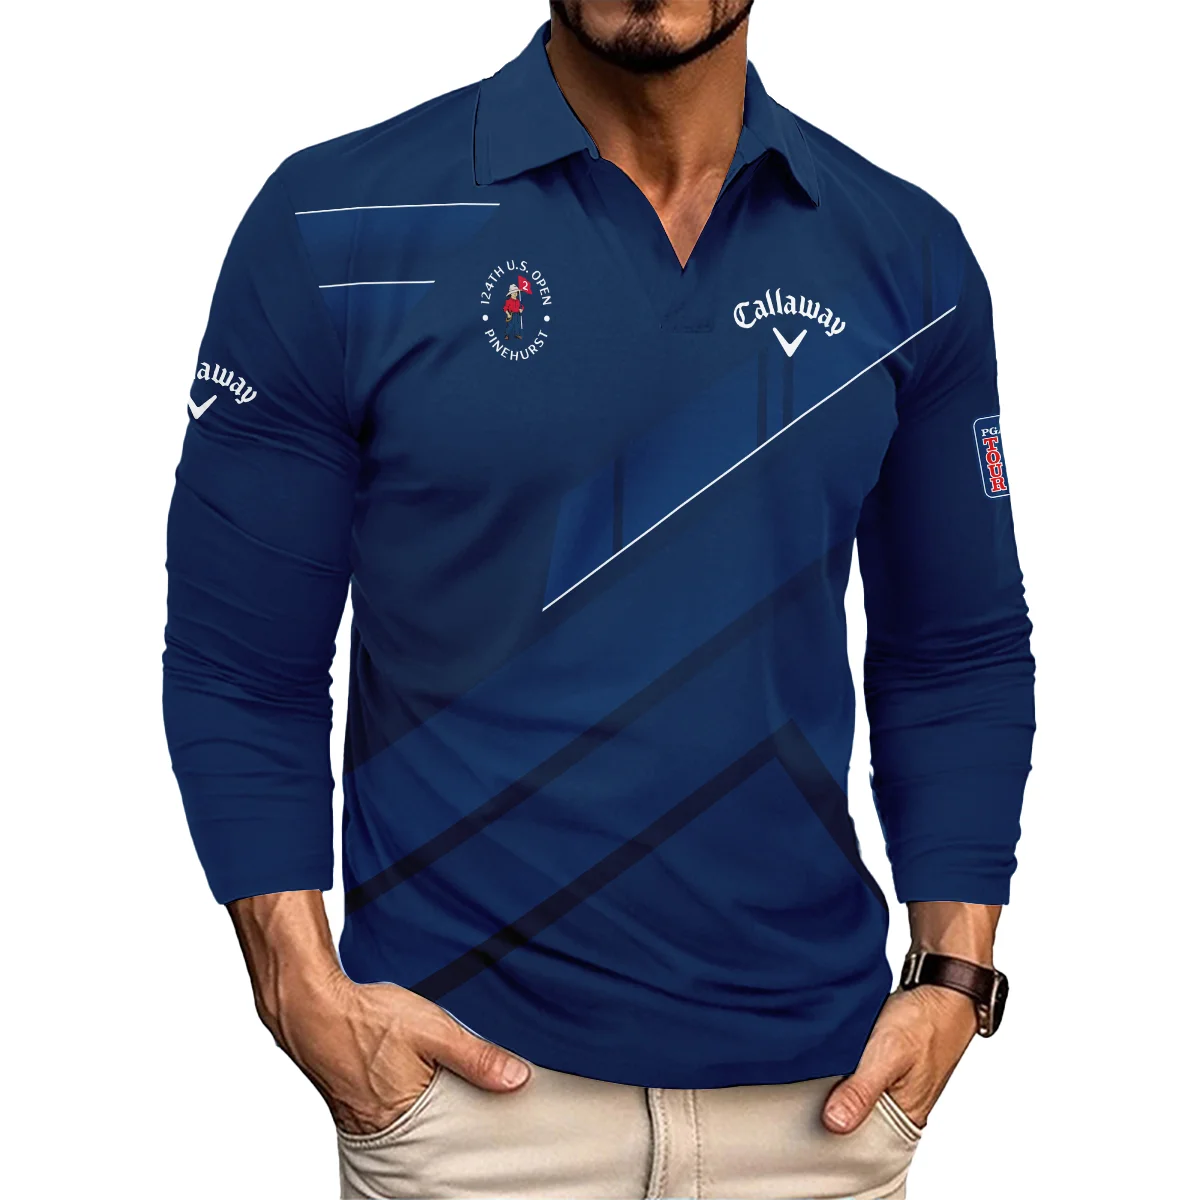 Callaway 124th U.S. Open Pinehurst Blue Gradient With White Straight Line Vneck Polo Shirt Style Classic Polo Shirt For Men